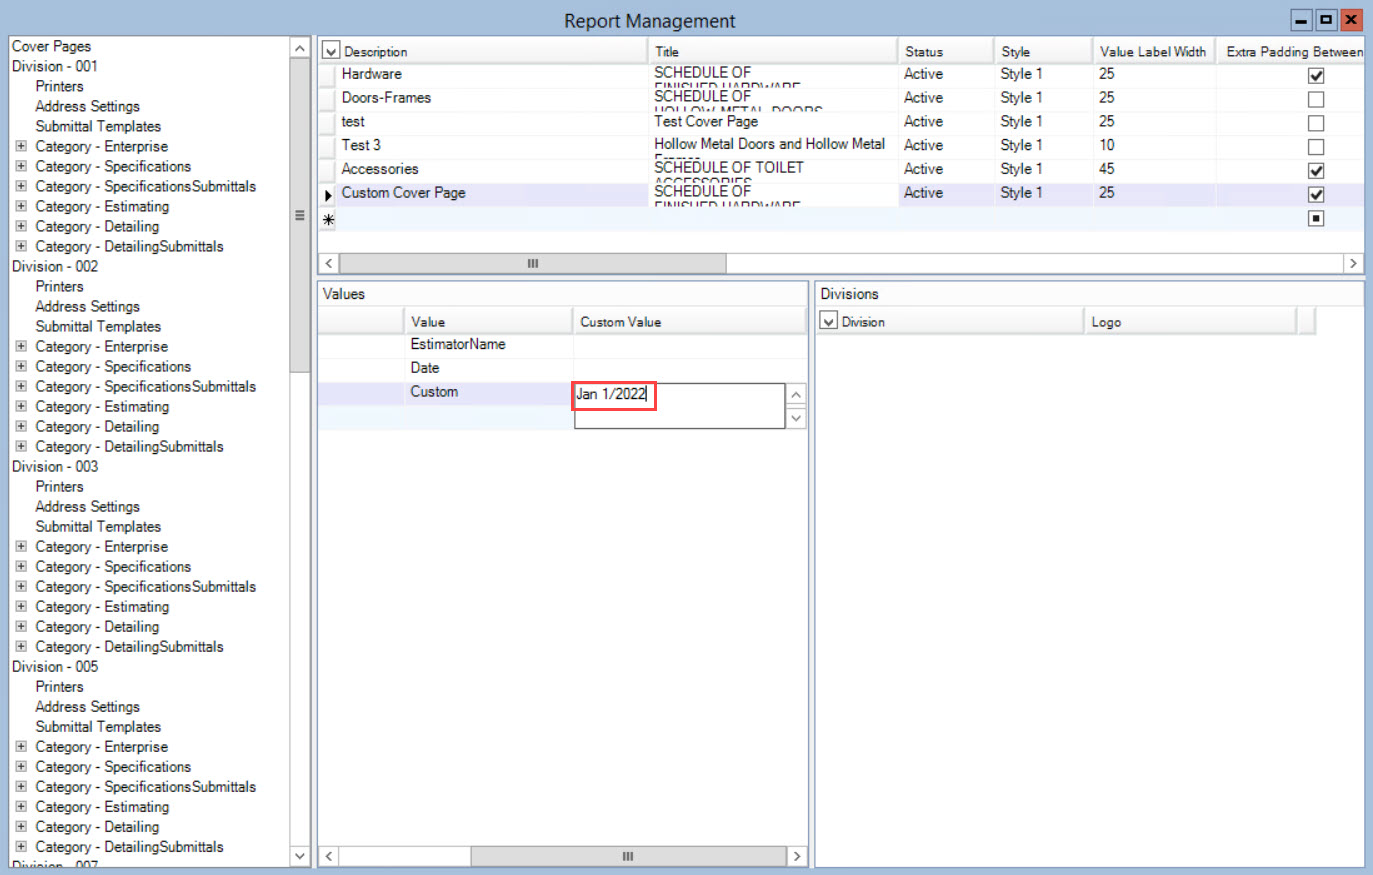 Report Management window, Values pane; shows the location of the Custom Value field and an example of a custom value.